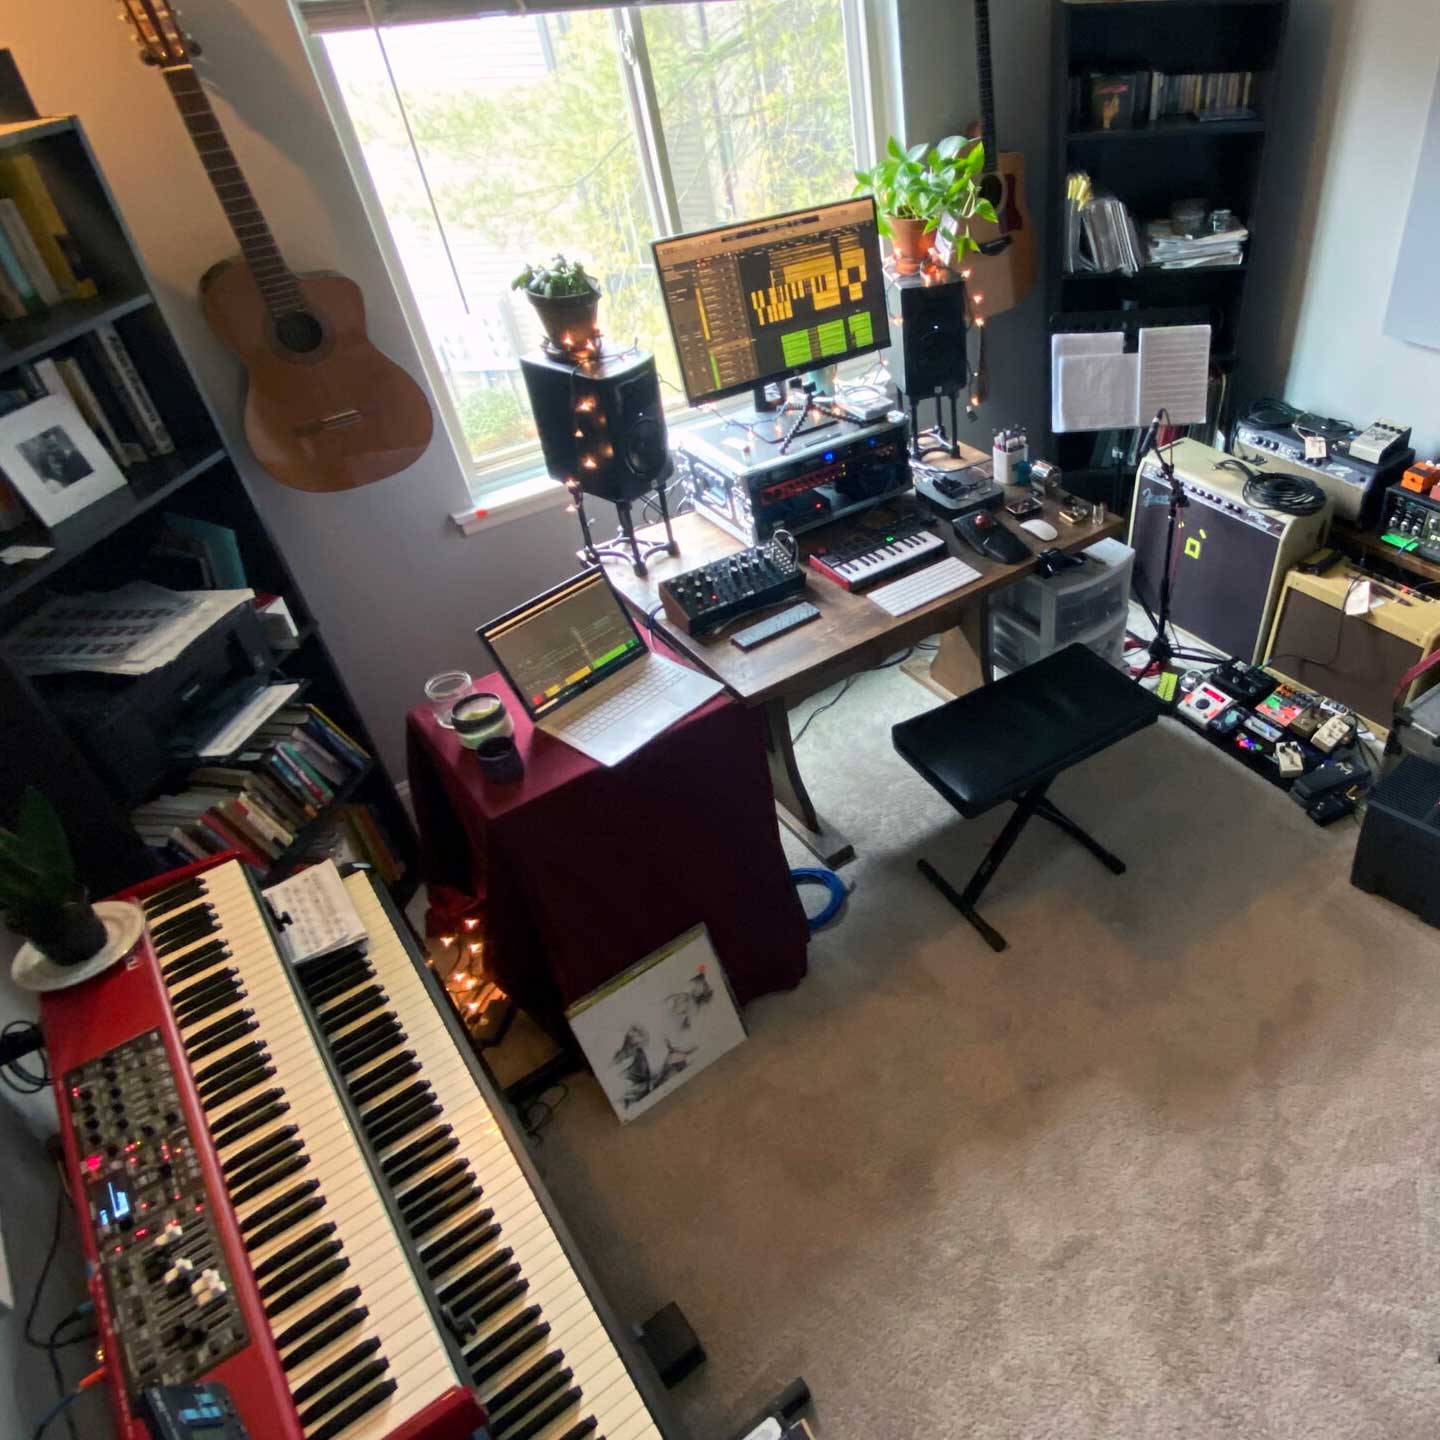 Home office studio with keyboard, amplifiers and other musical equipment